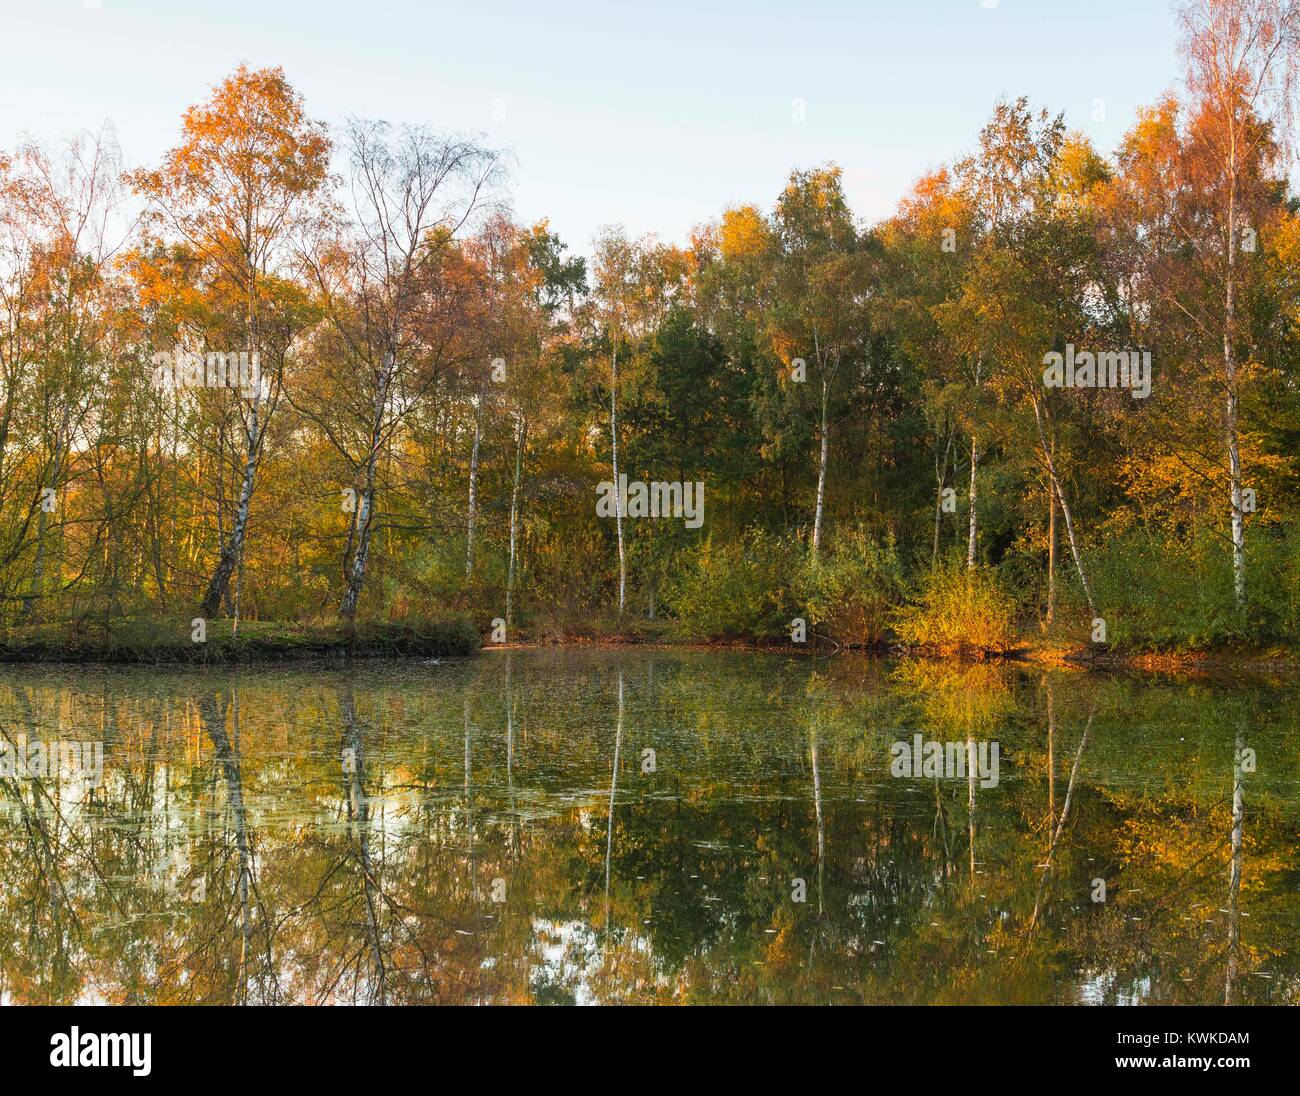 An image of trees reflecting in a pond, taken on a cold autumn morning near Bodymoor Heath, Tamworth, North Warwickshire, England, UK Stock Photo